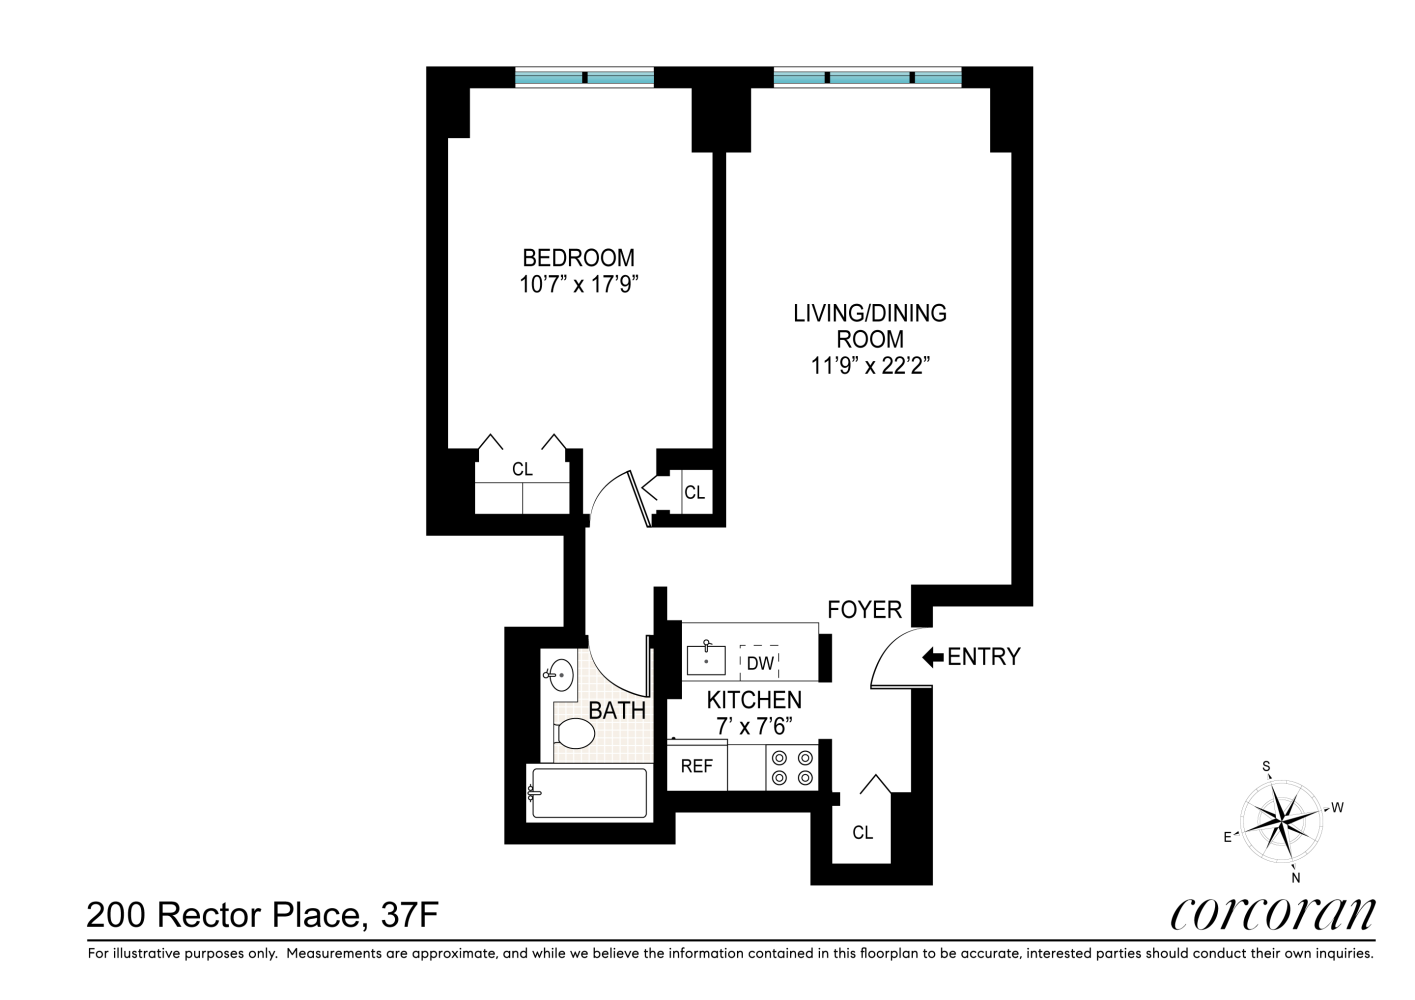 Floorplan for 200 Rector Place, 37F